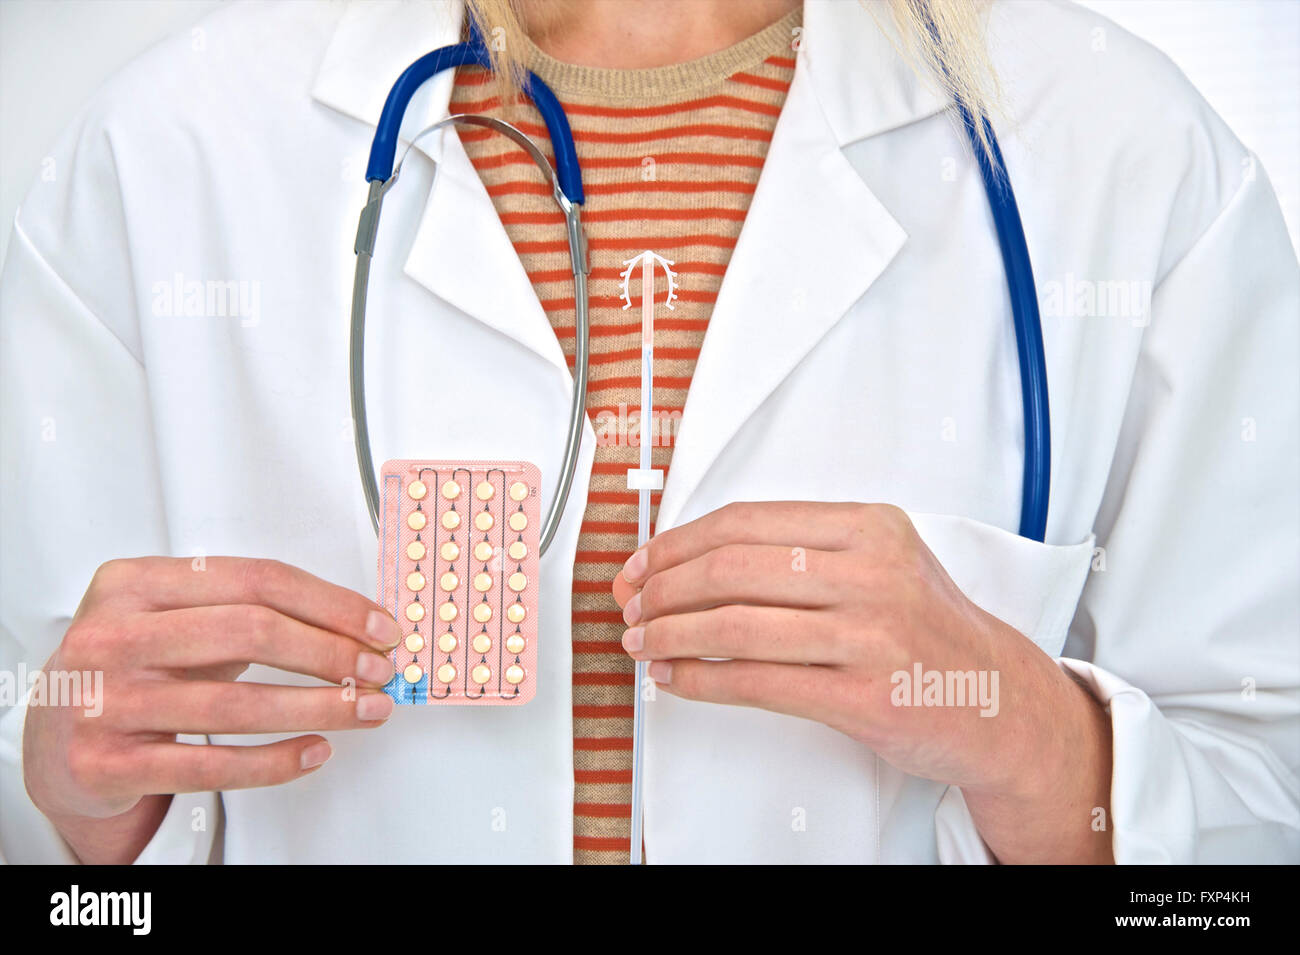 MODEL RELEASED. Female doctor holding intra uterine device and oral contraception pills. Stock Photo